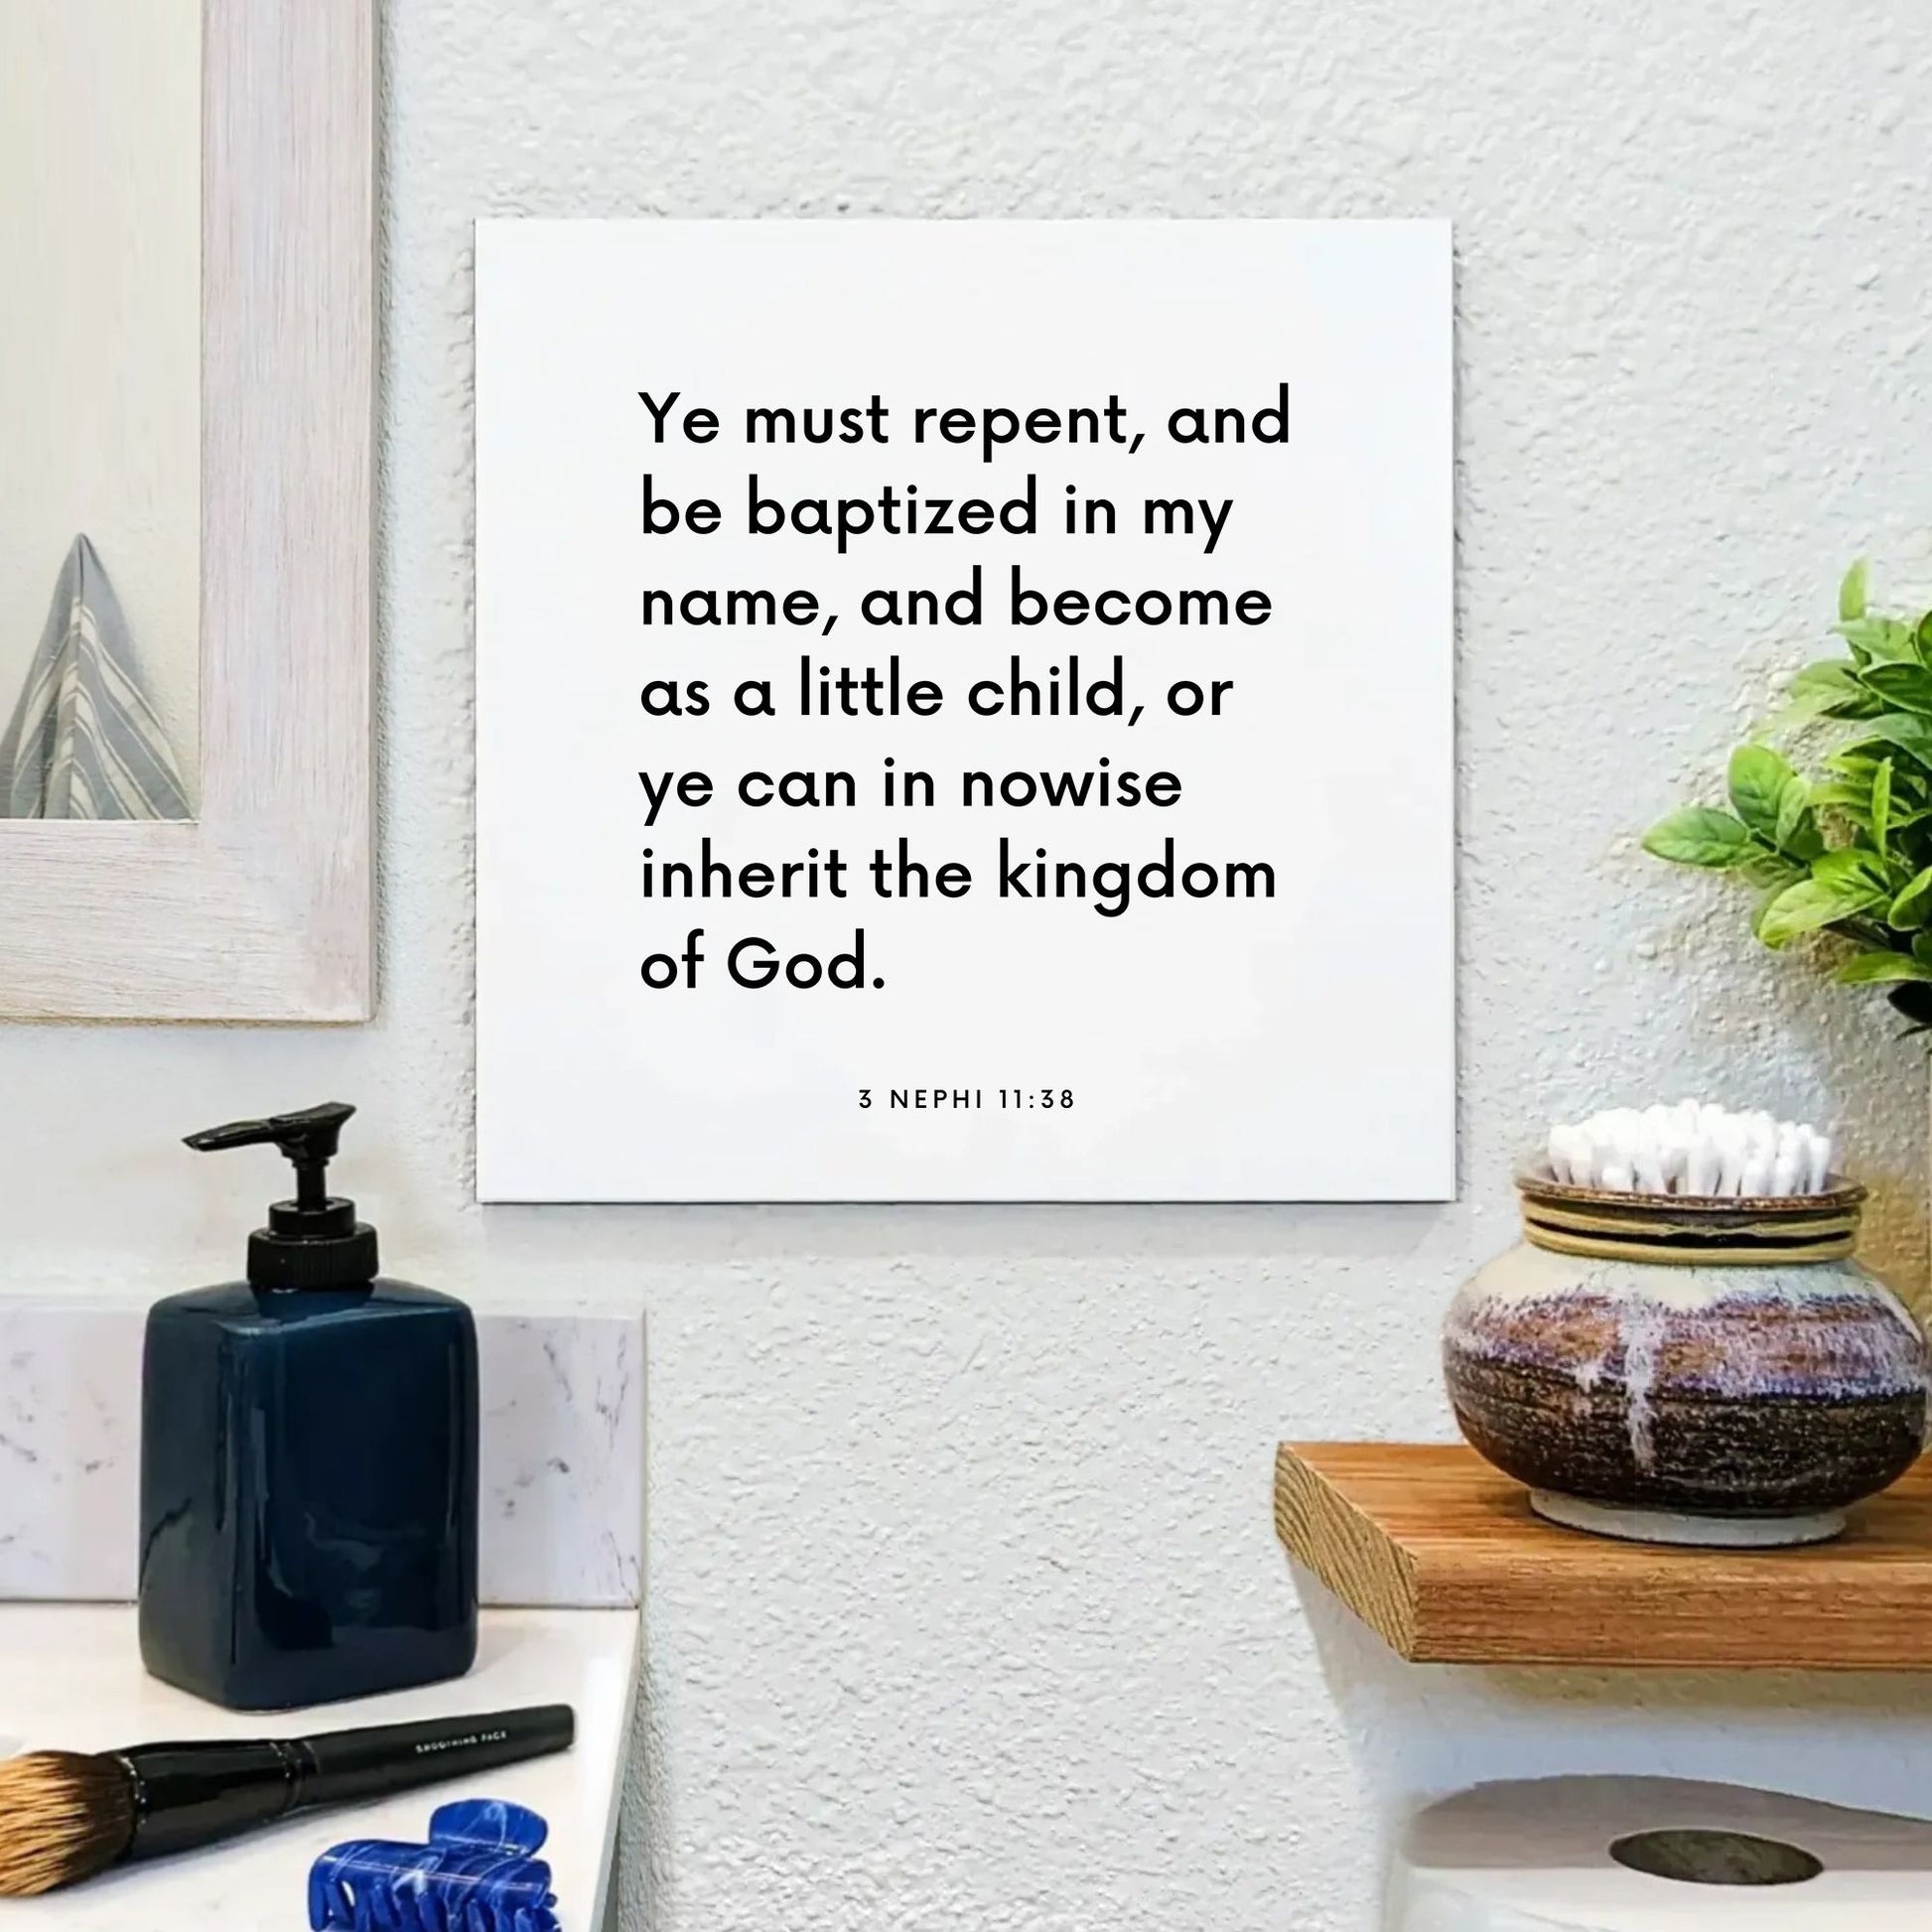 Bathroom mouting of the scripture tile for 3 Nephi 11:38 - "Ye must repent, and be baptized in my name"